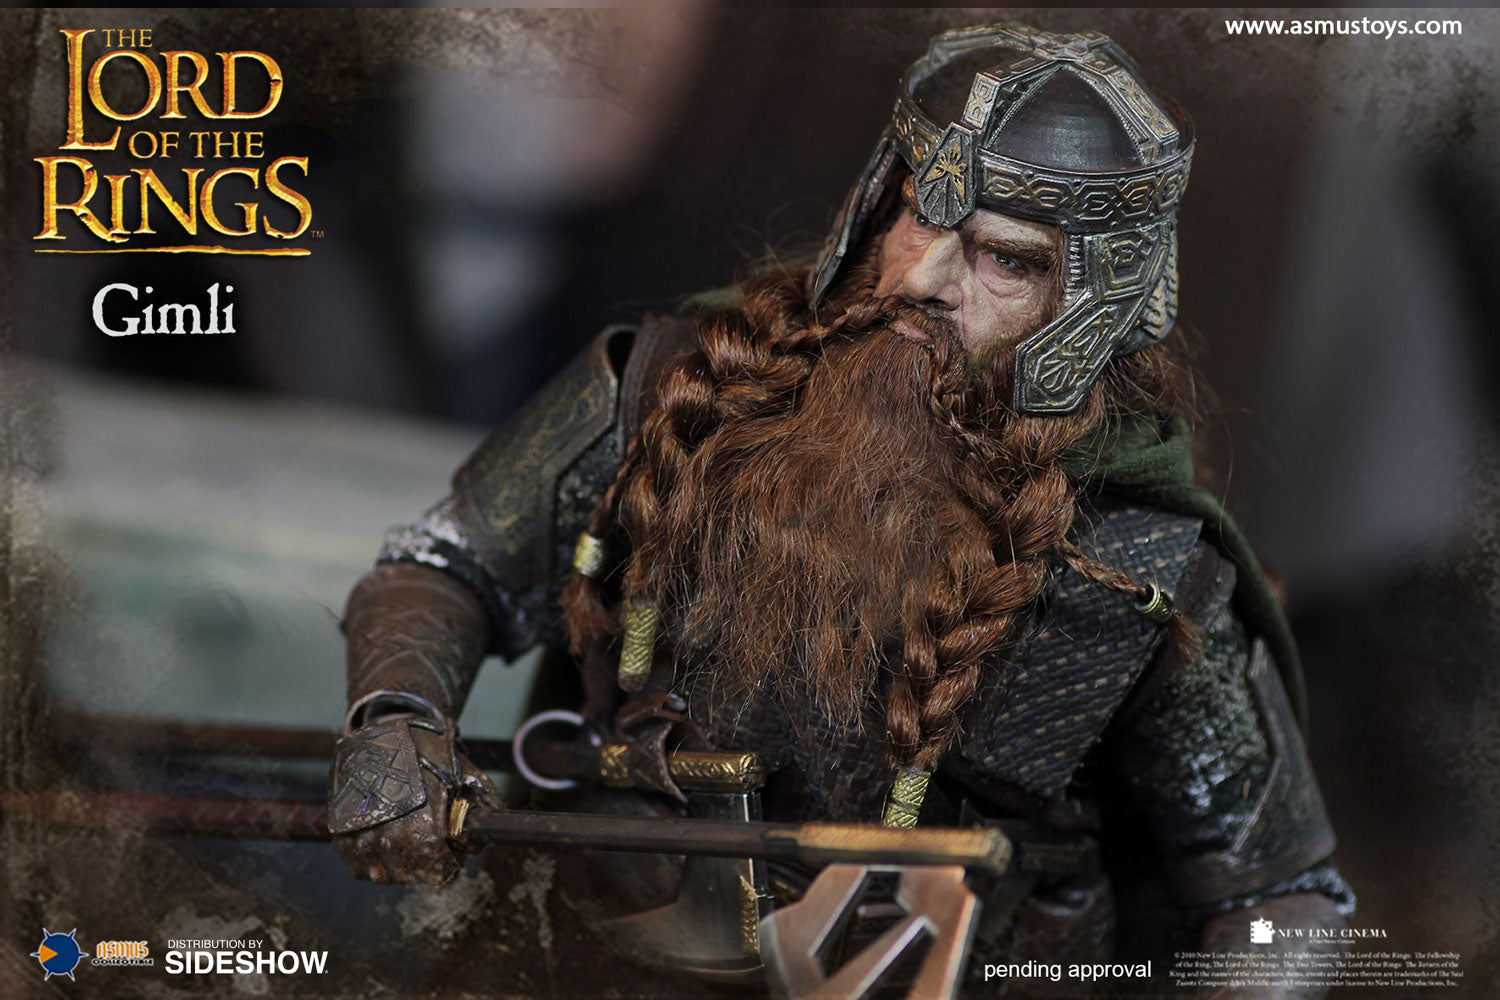 Asmus 1/6 The Lord of the Rings Series Gimli Sixth Scale Figure